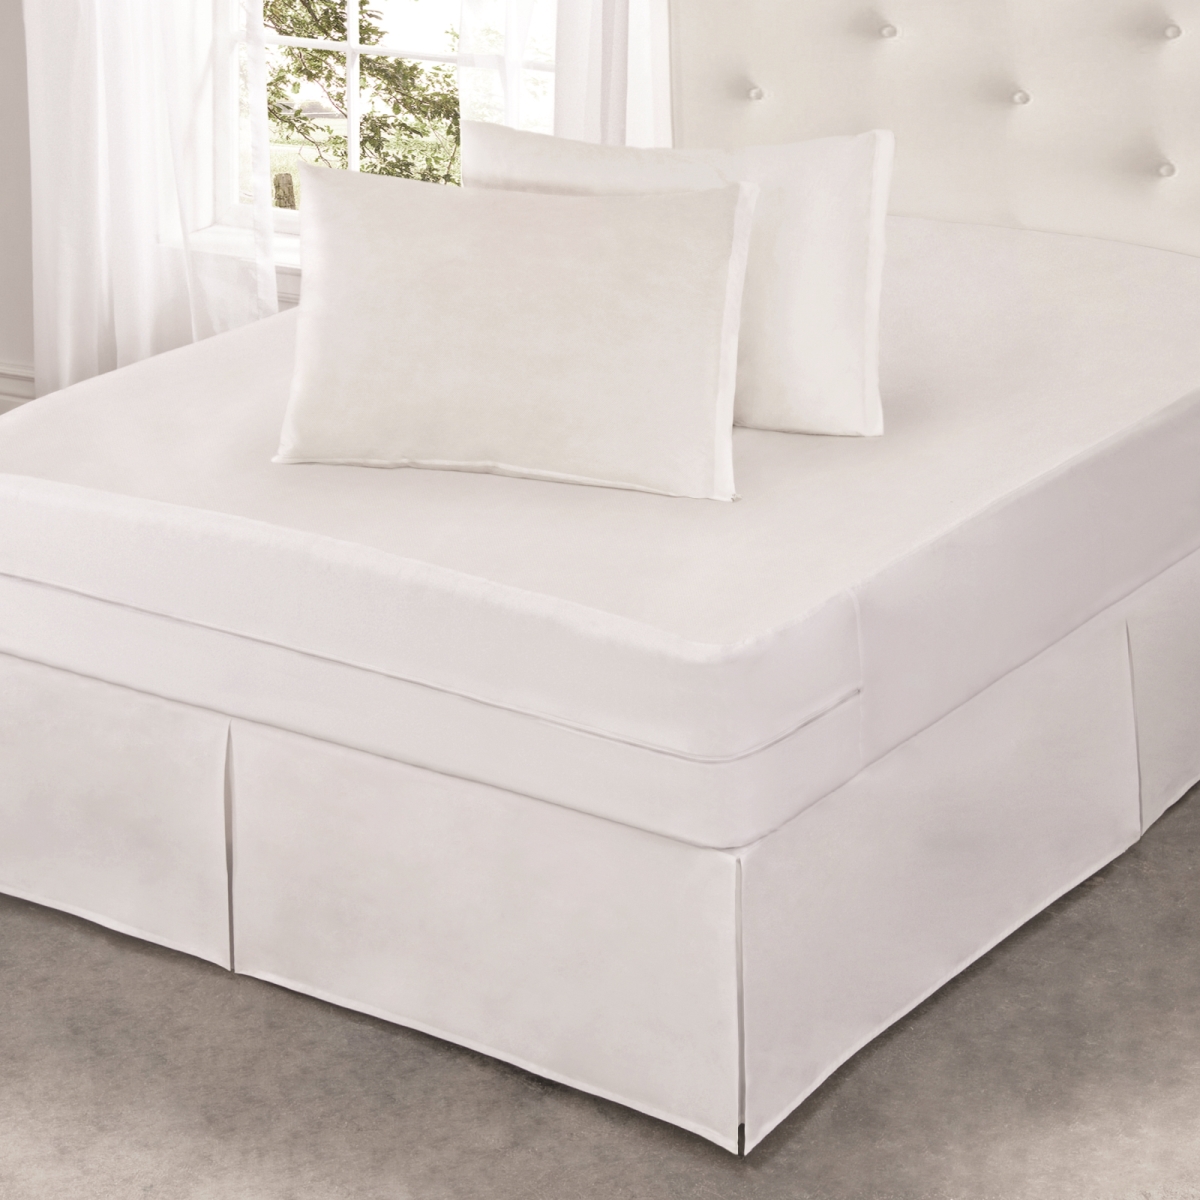 All166xxwhit06 Easy Care Mattress Protector With Bed Bug Blocker, White - Twin Size & Extra Large